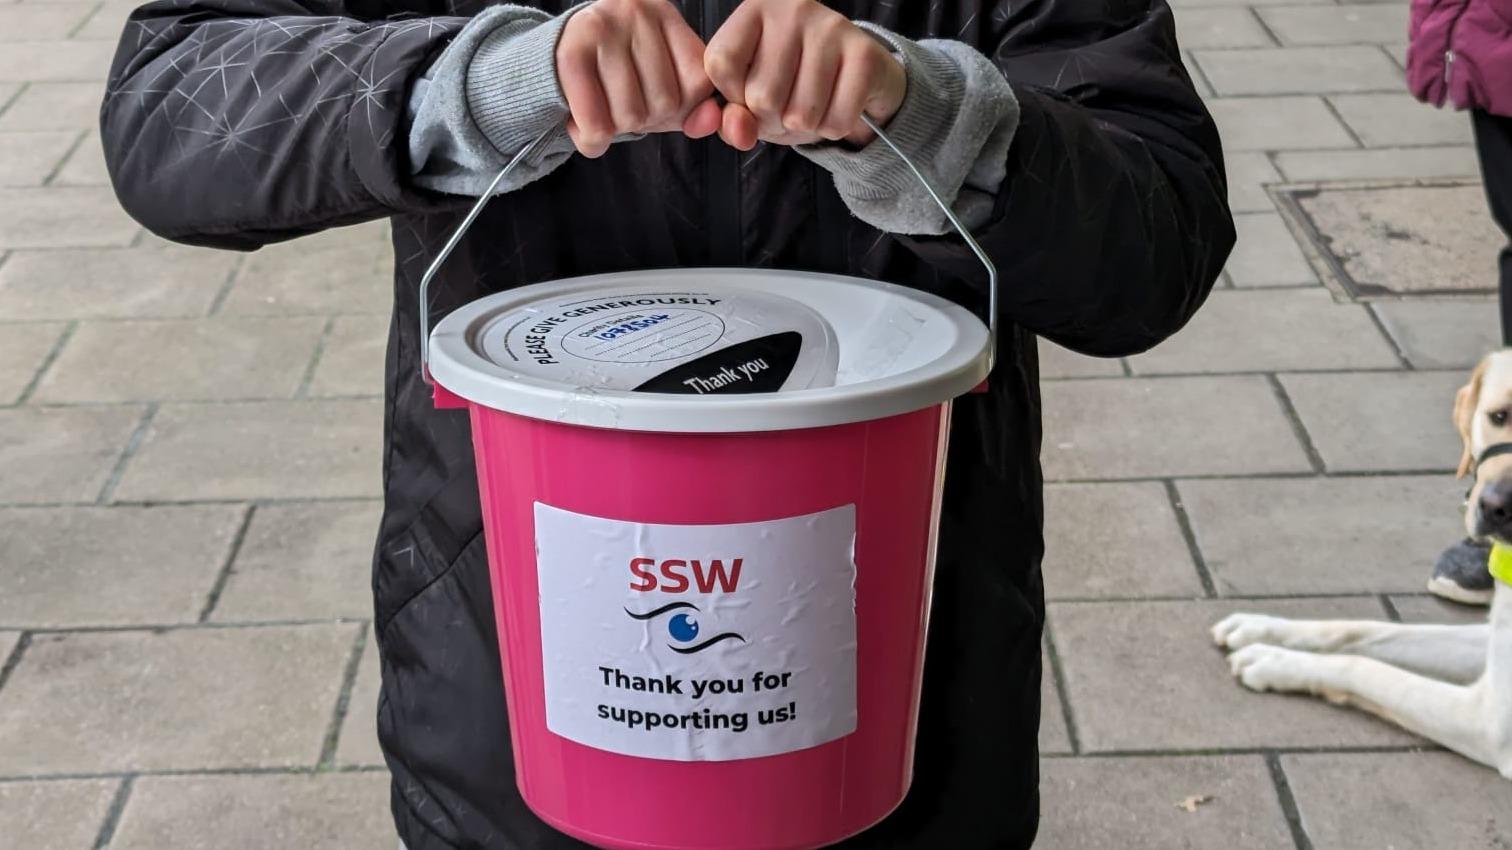 An image of someone holding an SSW donation bucket